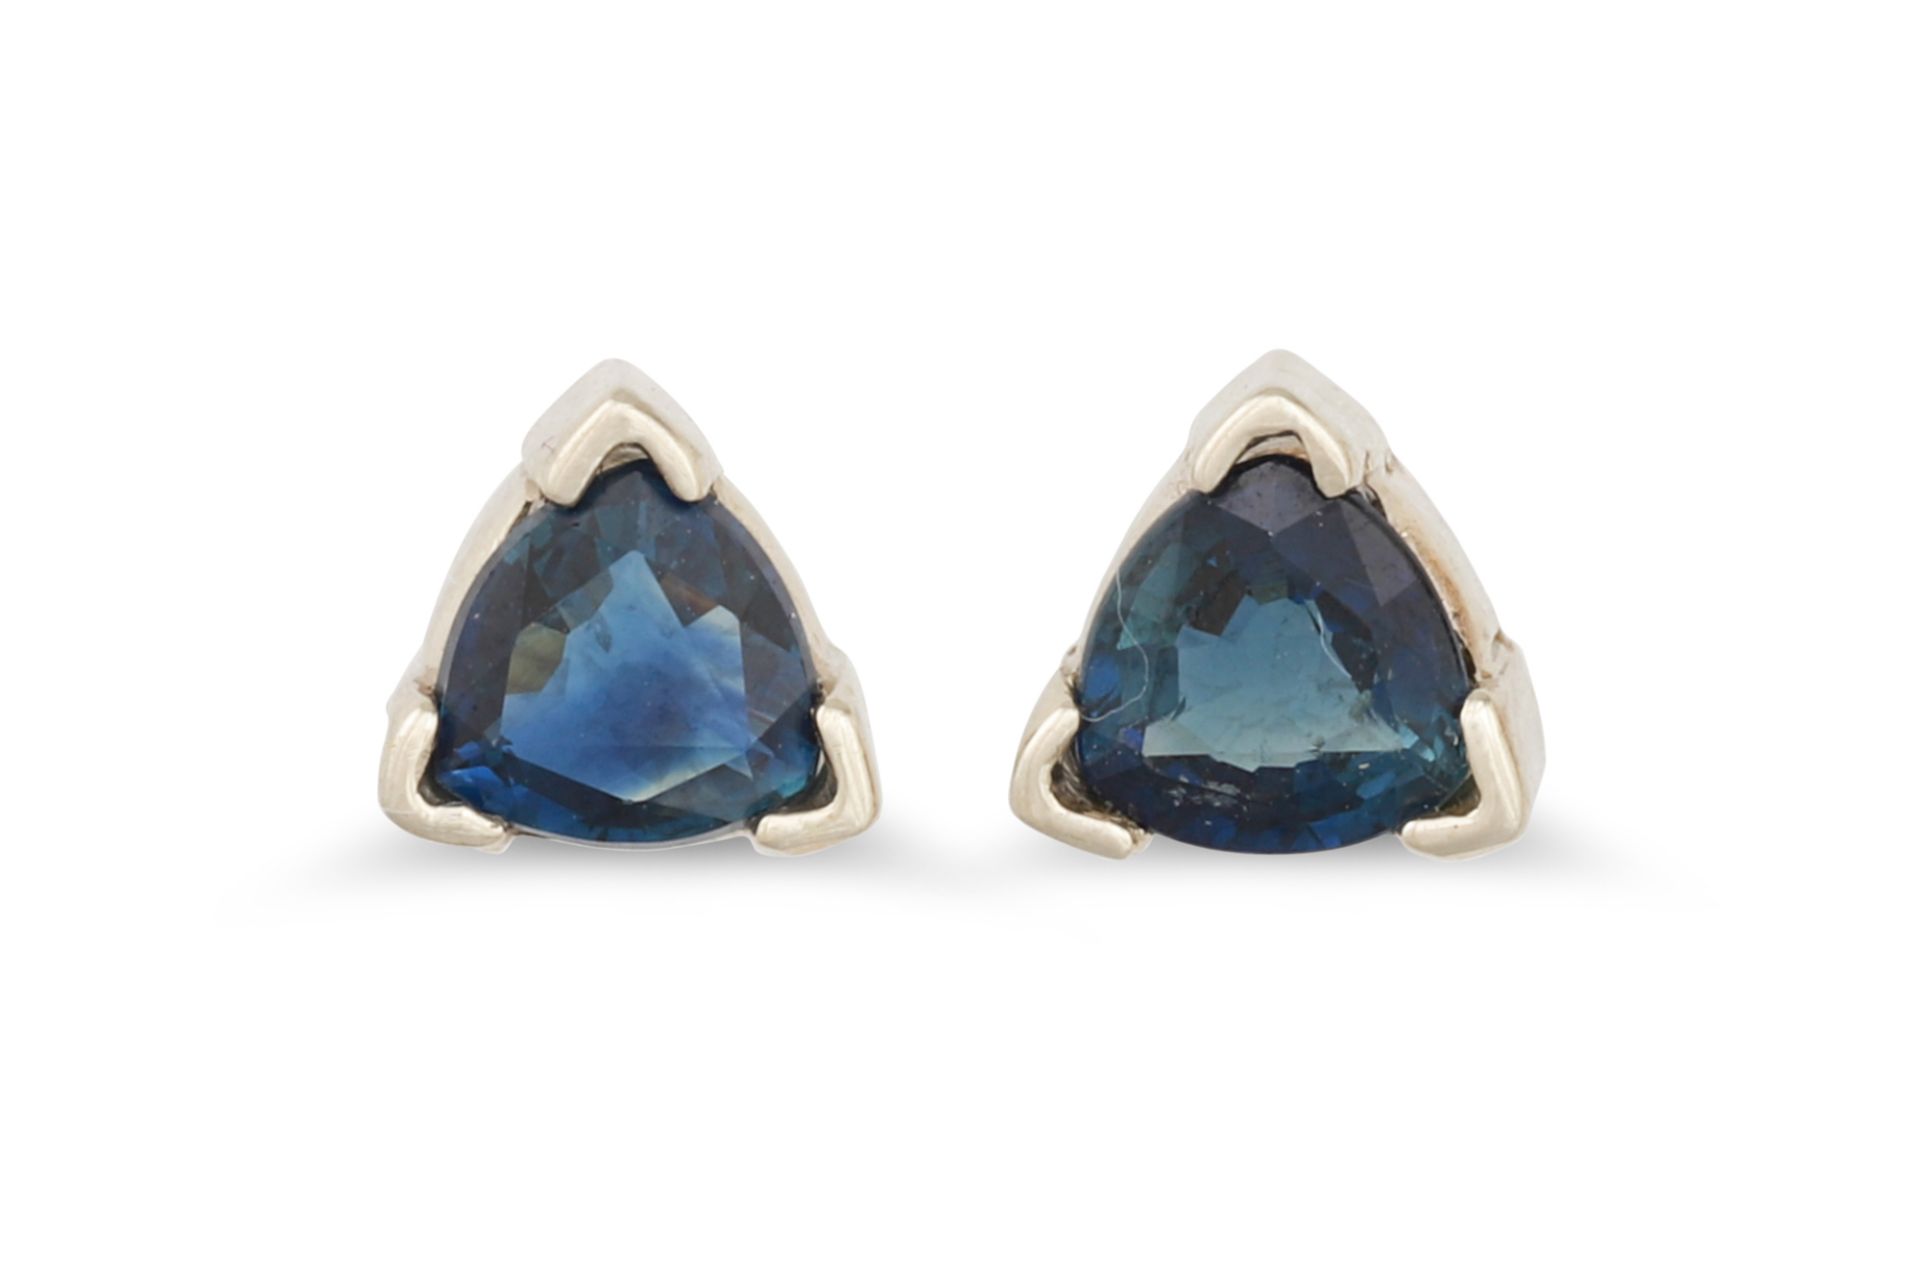 A PAIR OF SAPPHIRE SET EARRINGS, triangular shaped, mounted in white gold